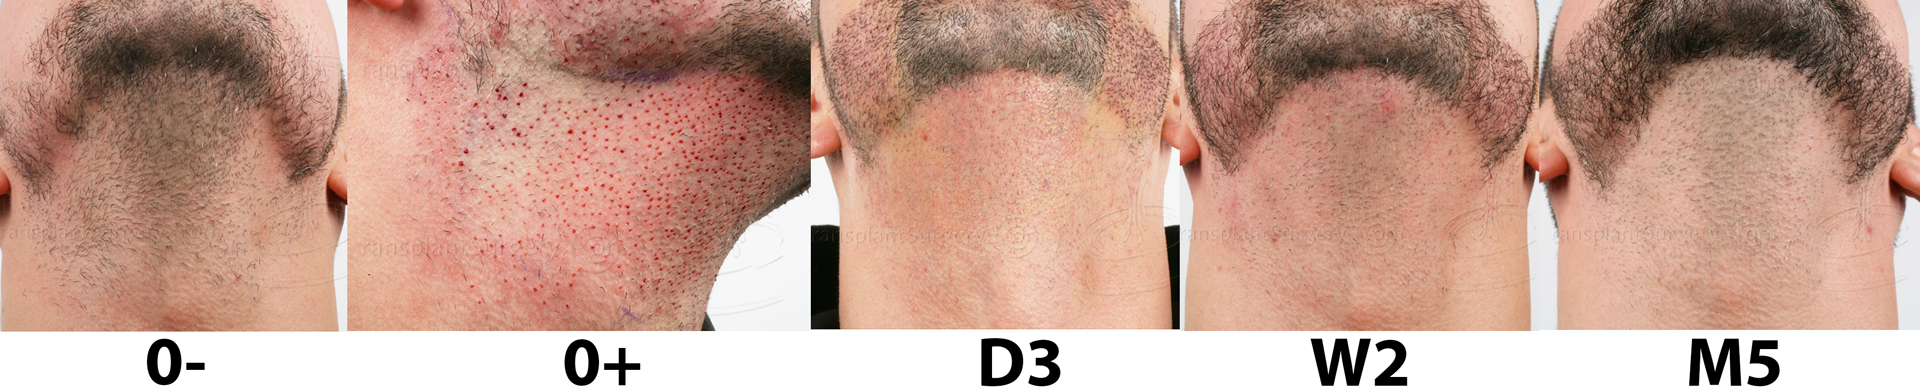 Dr.Devroye-HTS-Clinic-1011-FUE-Beard-Montage4